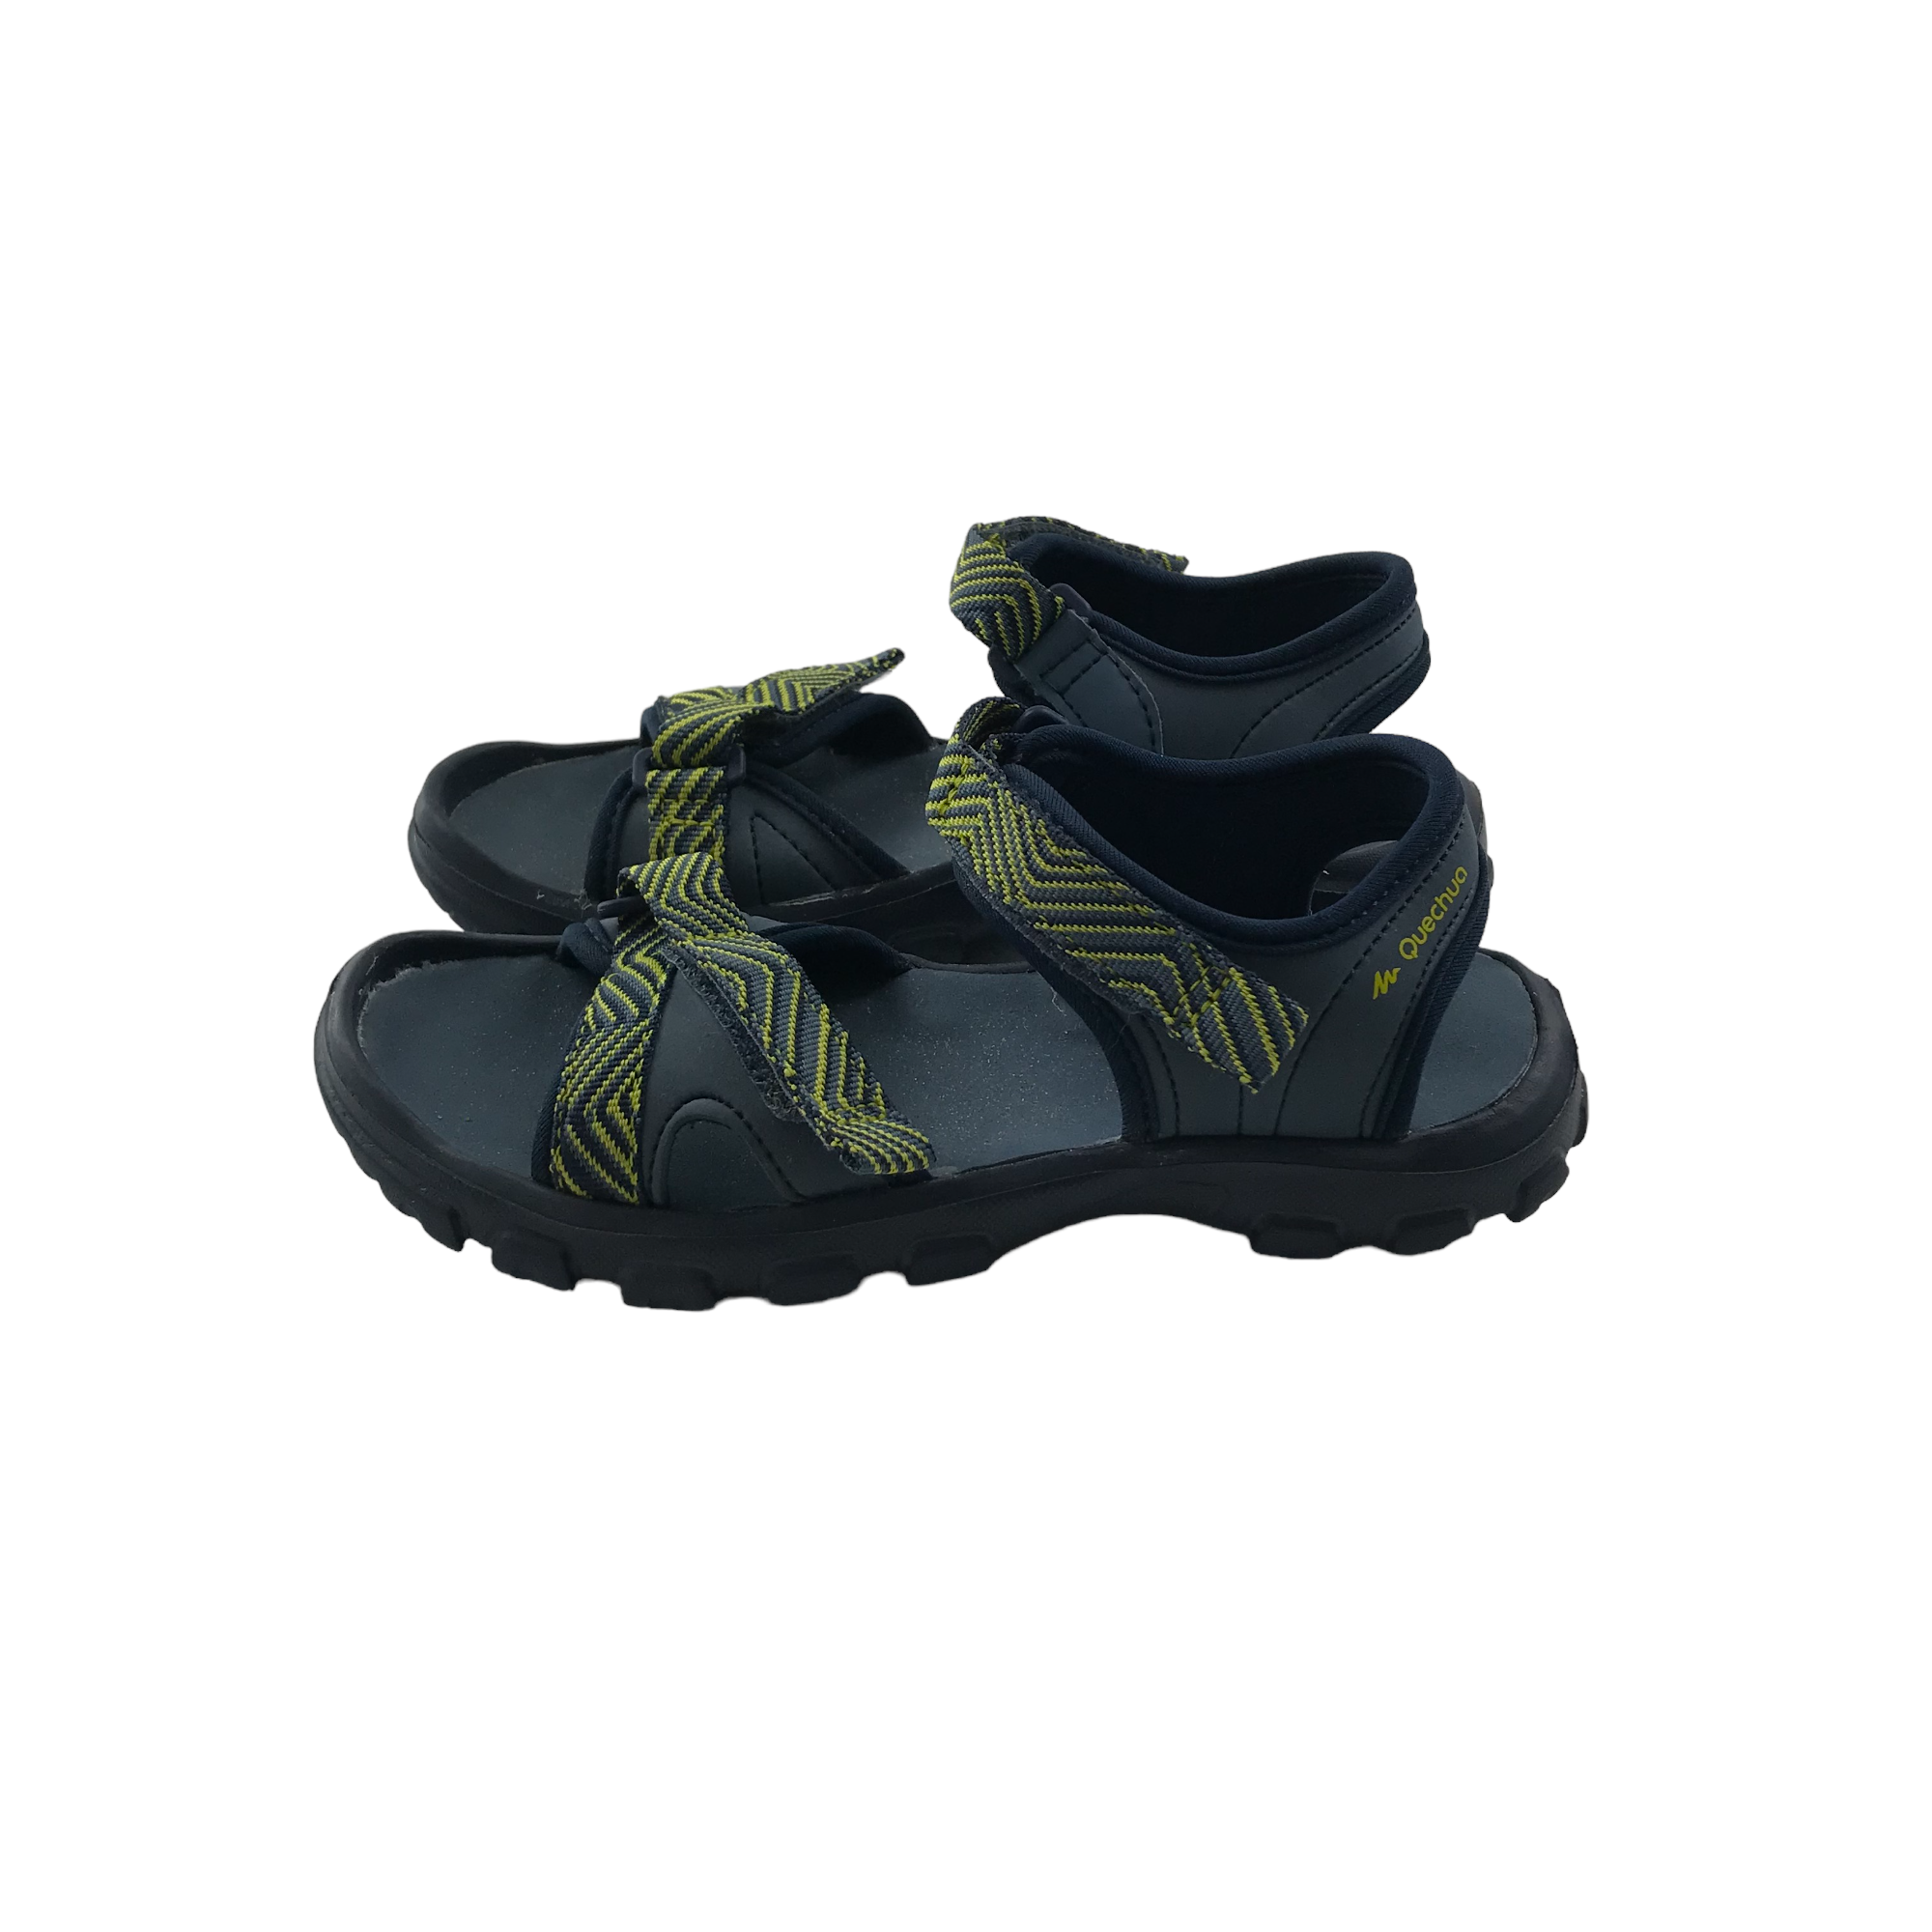 Decathlon's Bivouac Sandals look like a budget version of Xero Shows  Z-Treks. Anyone have any experience of either or recommendations for good  barefoot sandals? More info in comments : r/BarefootRunning